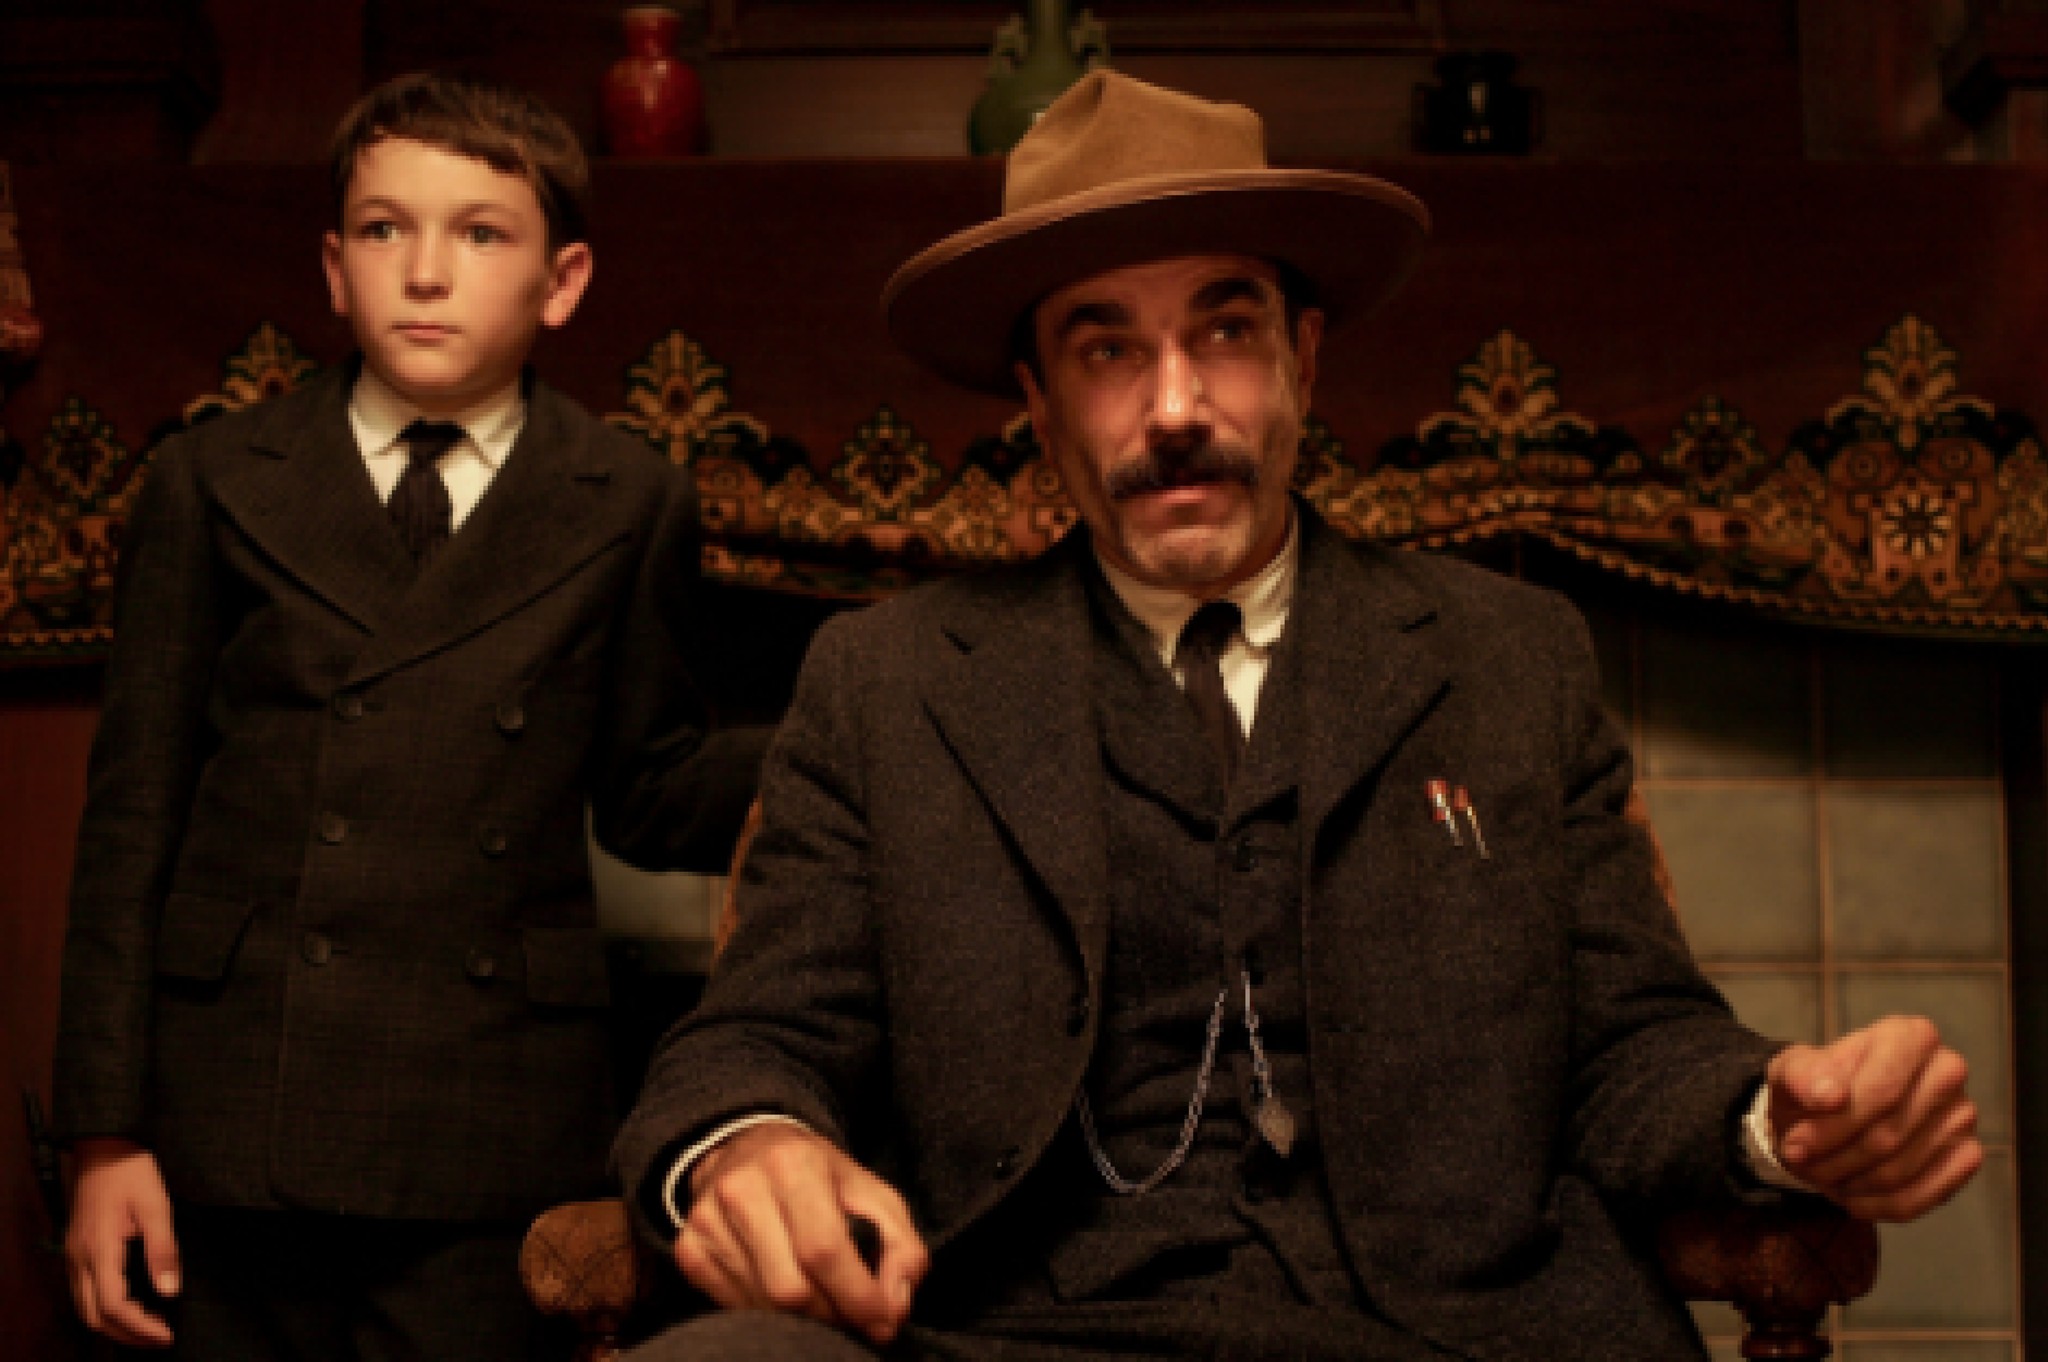 Still of Daniel Day-Lewis and Dillon Freasier in Bus kraujo (2007)